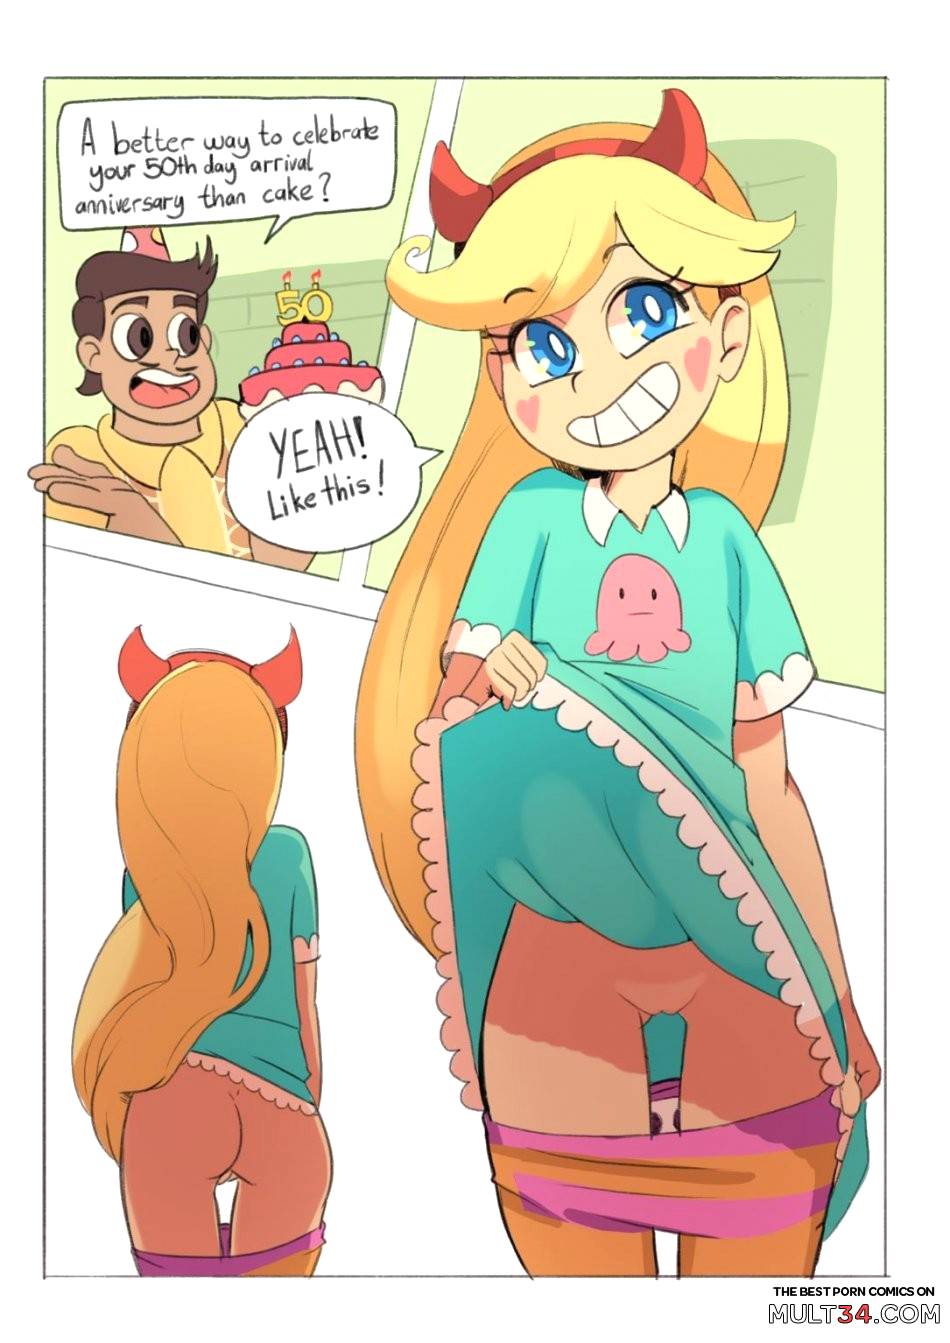 Star's 50th Day Anniversary page 2